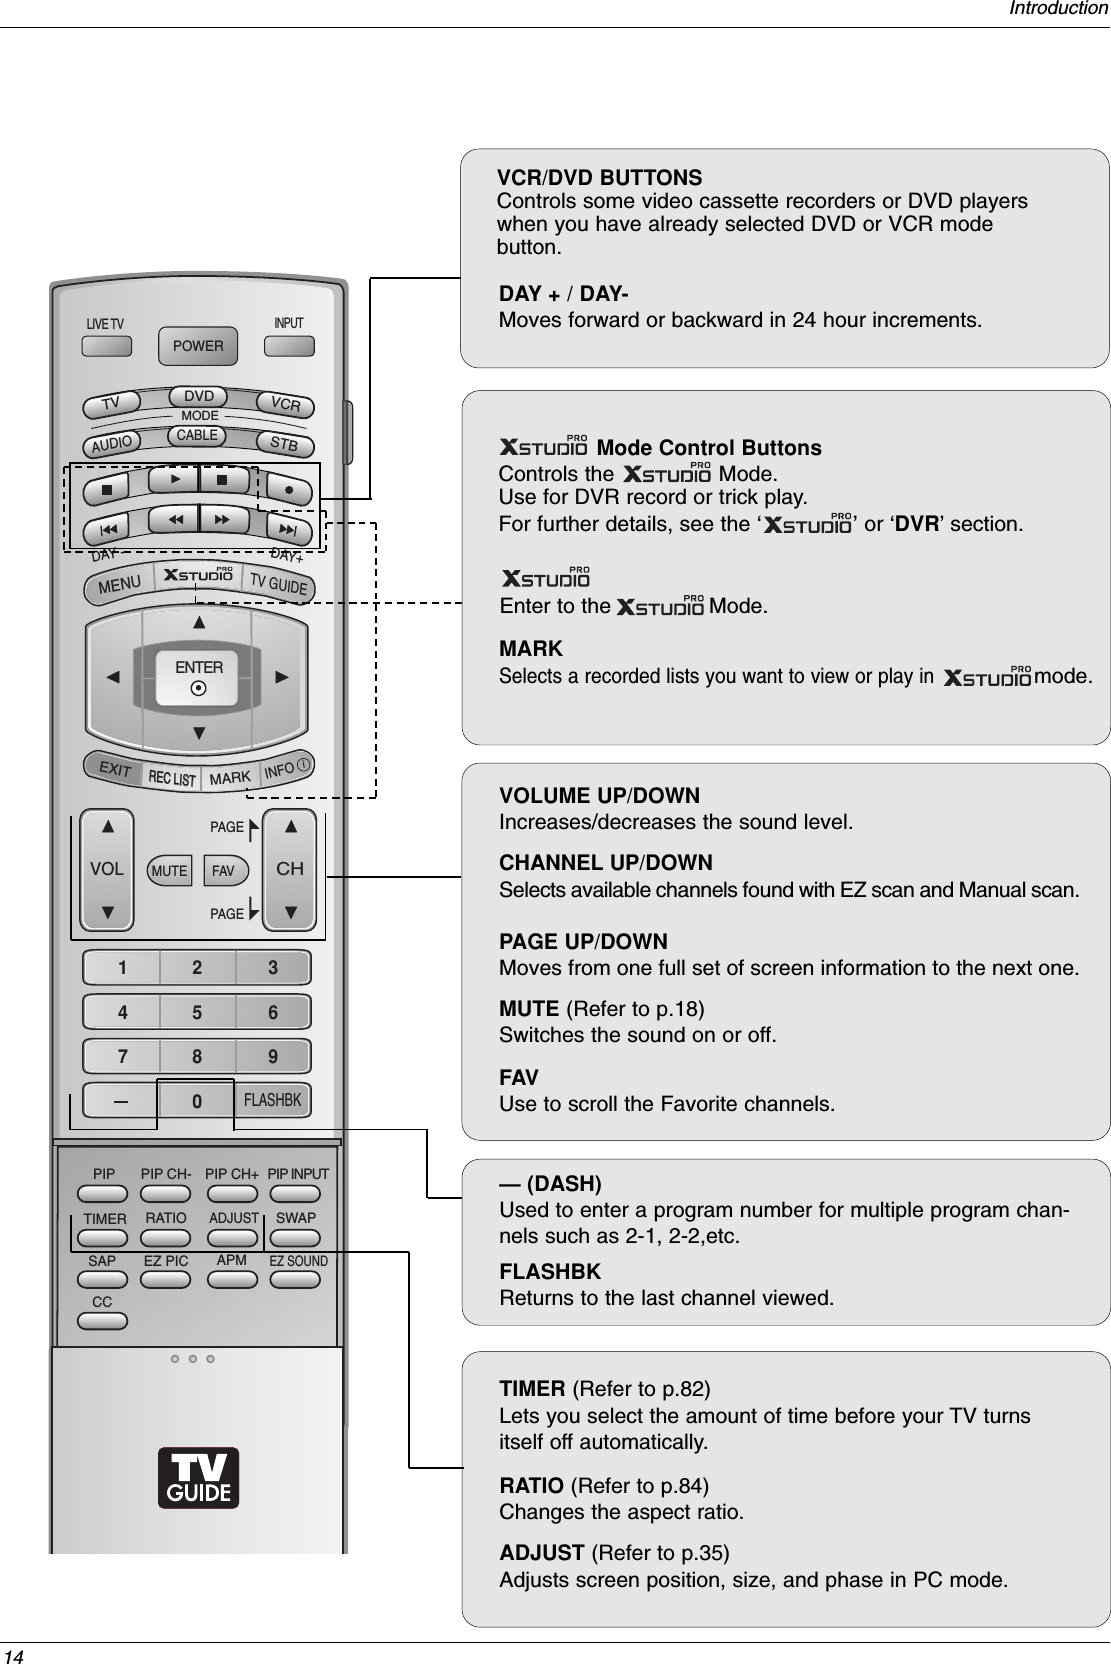 14IntroductionTIMER (Refer to p.82)Lets you select the amount of time before your TV turnsitself off automatically.RATIO (Refer to p.84)Changes the aspect ratio.ADJUST (Refer to p.35)Adjusts screen position, size, and phase in PC mode.FAVUse to scroll the Favorite channels.MUTE (Refer to p.18)Switches the sound on or off.CHANNEL UP/DOWNSelects available channels found with EZ scan and Manual scan.PAGE UP/DOWNMoves from one full set of screen information to the next one.VOLUME UP/DOWNIncreases/decreases the sound level. LIVE TVINPUTVOLFLASHBKCHPOWER1 2 3     4 5 6    7809   ADJUSTRATIO SWAPTIMERPIP CH+PIP CH-PIPSAPCCEZ PIC APMEZ SOUNDPIP INPUTAUDIODAY -CABLEMENUMUTEPAGEPAGEFAVTV GUIDEVCRDAY+STBEXITREC LISTREC LISTMARKTVDVDMODEINFOiENTERMode Control ButtonsControls the Mode. Use for DVR record or trick play. For further details, see the ‘’or ‘DVR’section.— (DASH)Used to enter a program number for multiple program chan-nels such as 2-1, 2-2,etc.FLASHBKReturns to the last channel viewed.VCR/DVD BUTTONSControls some video cassette recorders or DVD playerswhen you have already selected DVD or VCR mode button.DAY + / DAY- Moves forward or backward in 24 hour increments.Enter to the  Mode.MARKSelects a recorded lists you want to view or play in                 mode.